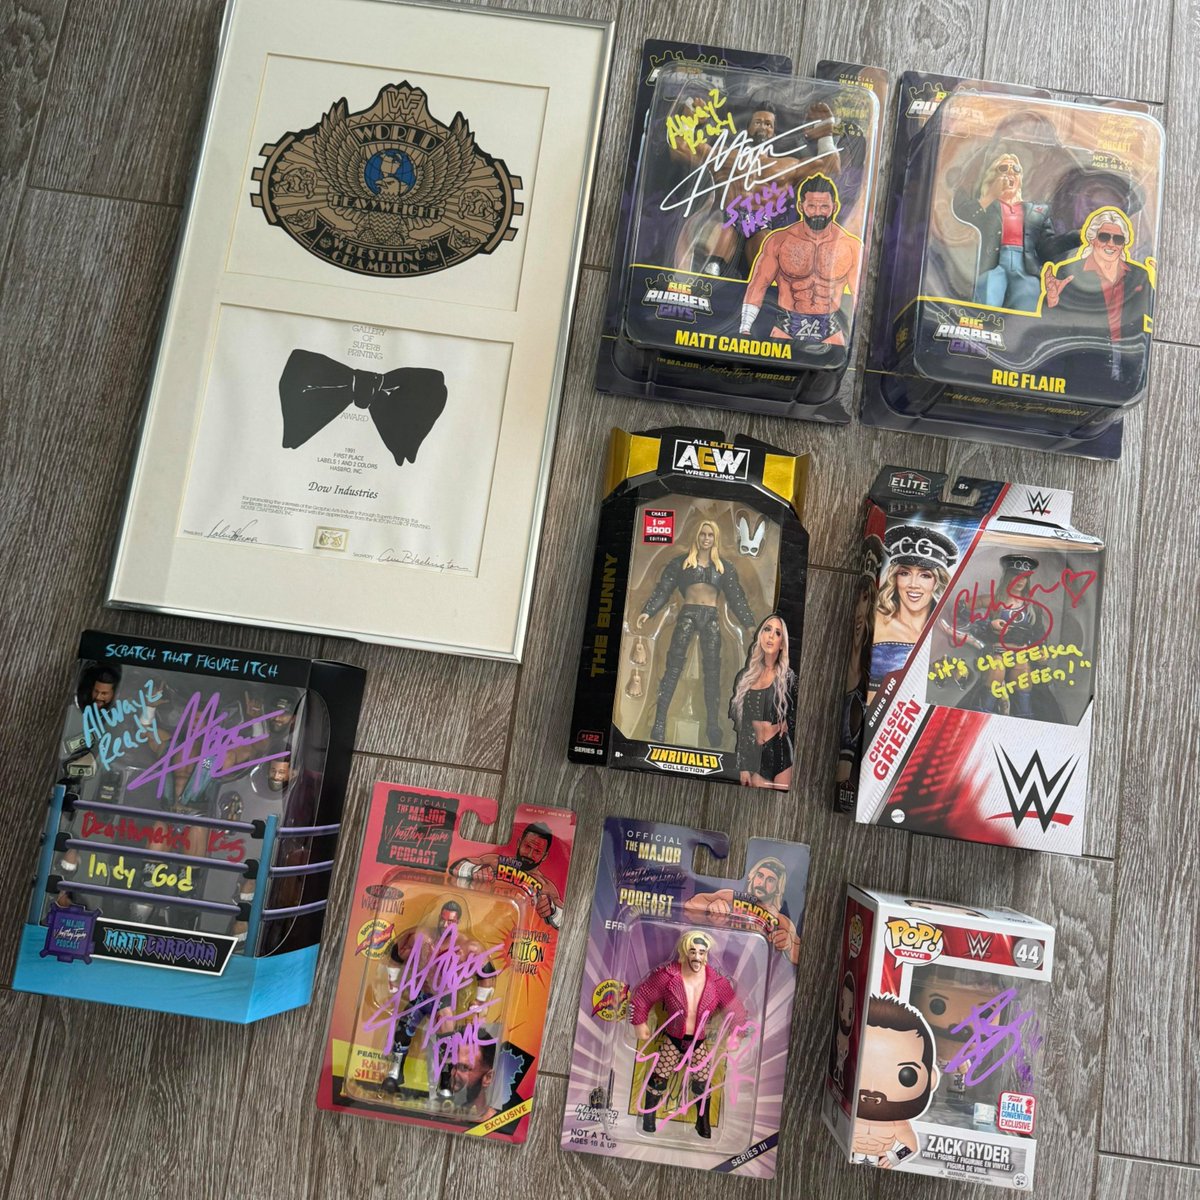 TODAY at 5:30 PM EDT, @TheMattCardona will be going live on @Whatnot to auction off SIGNED @ImChelseaGreen figures, #BigRubberGuys, and multiple Zack Ryder items! All starting at just $1!

whatnot.com/s/A3R3tgeD